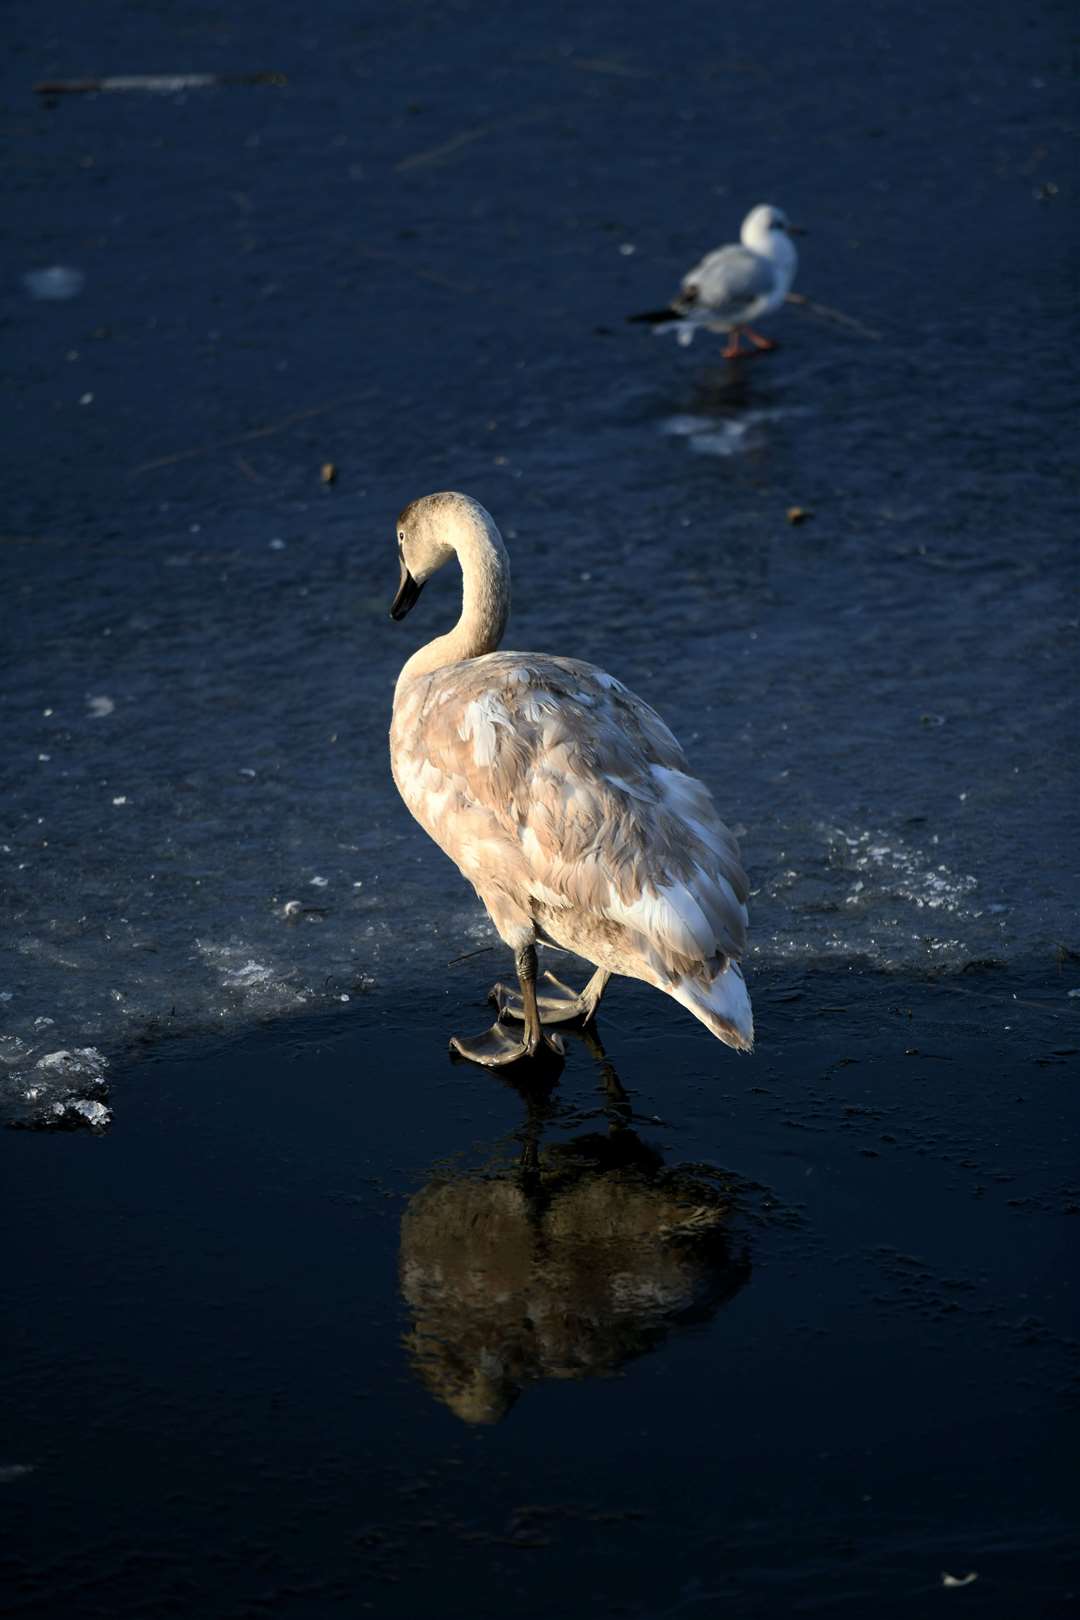 Luckily none of the swans were trapped in the ice on Sunday.